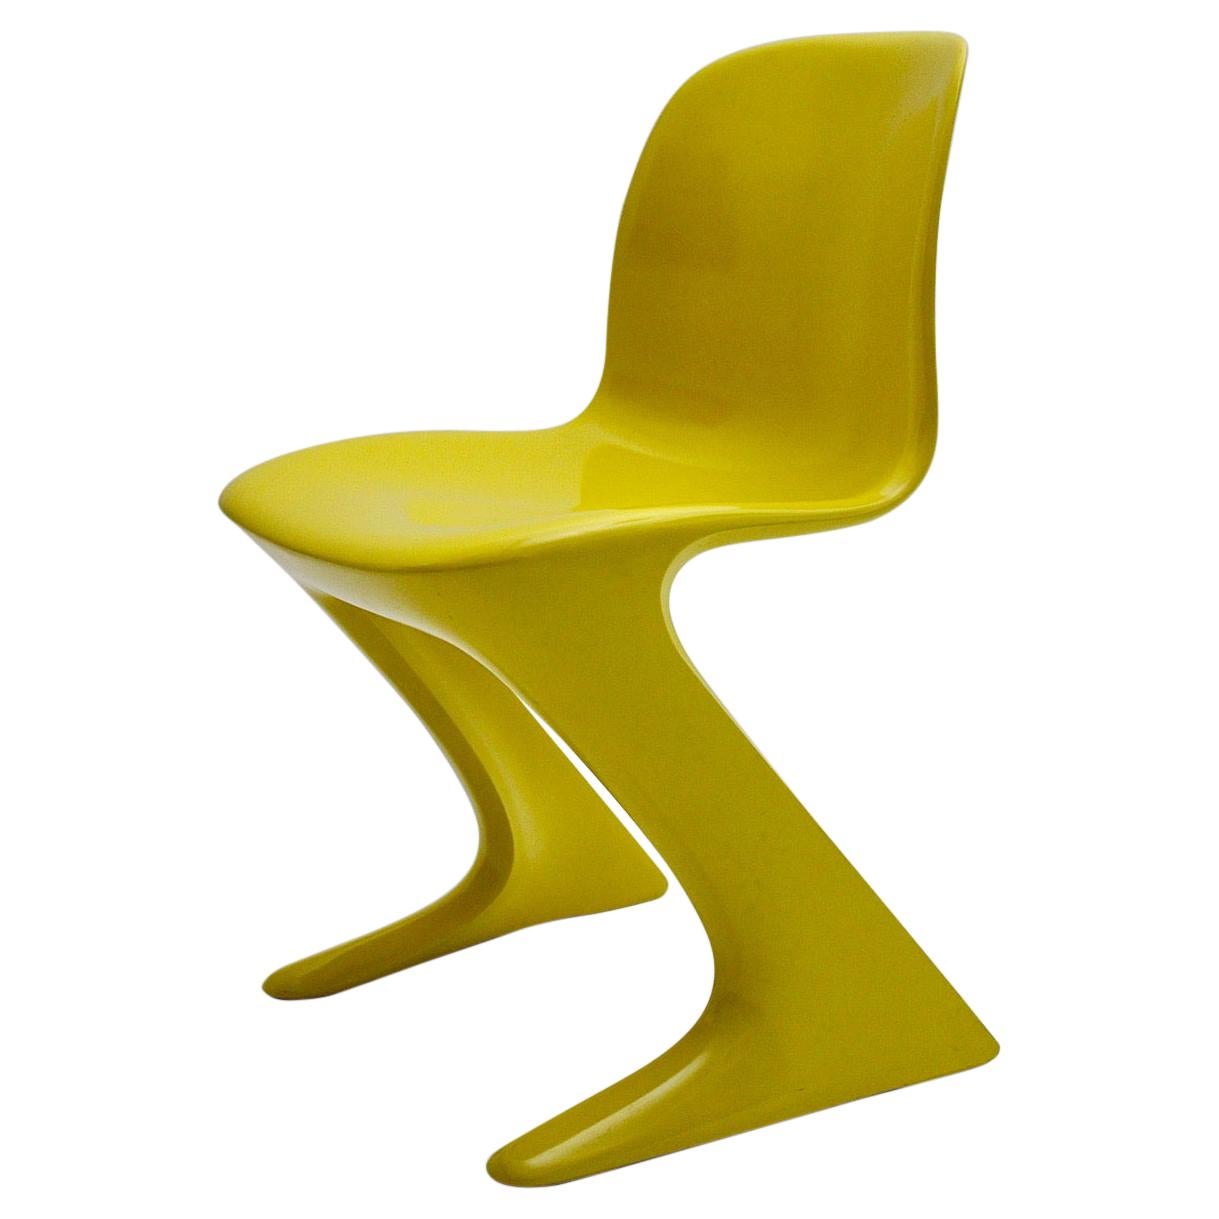 Space Age Vintage Yellow Plastic Chair Kangaroo Chair Ernst Moeckl 1960s Germany